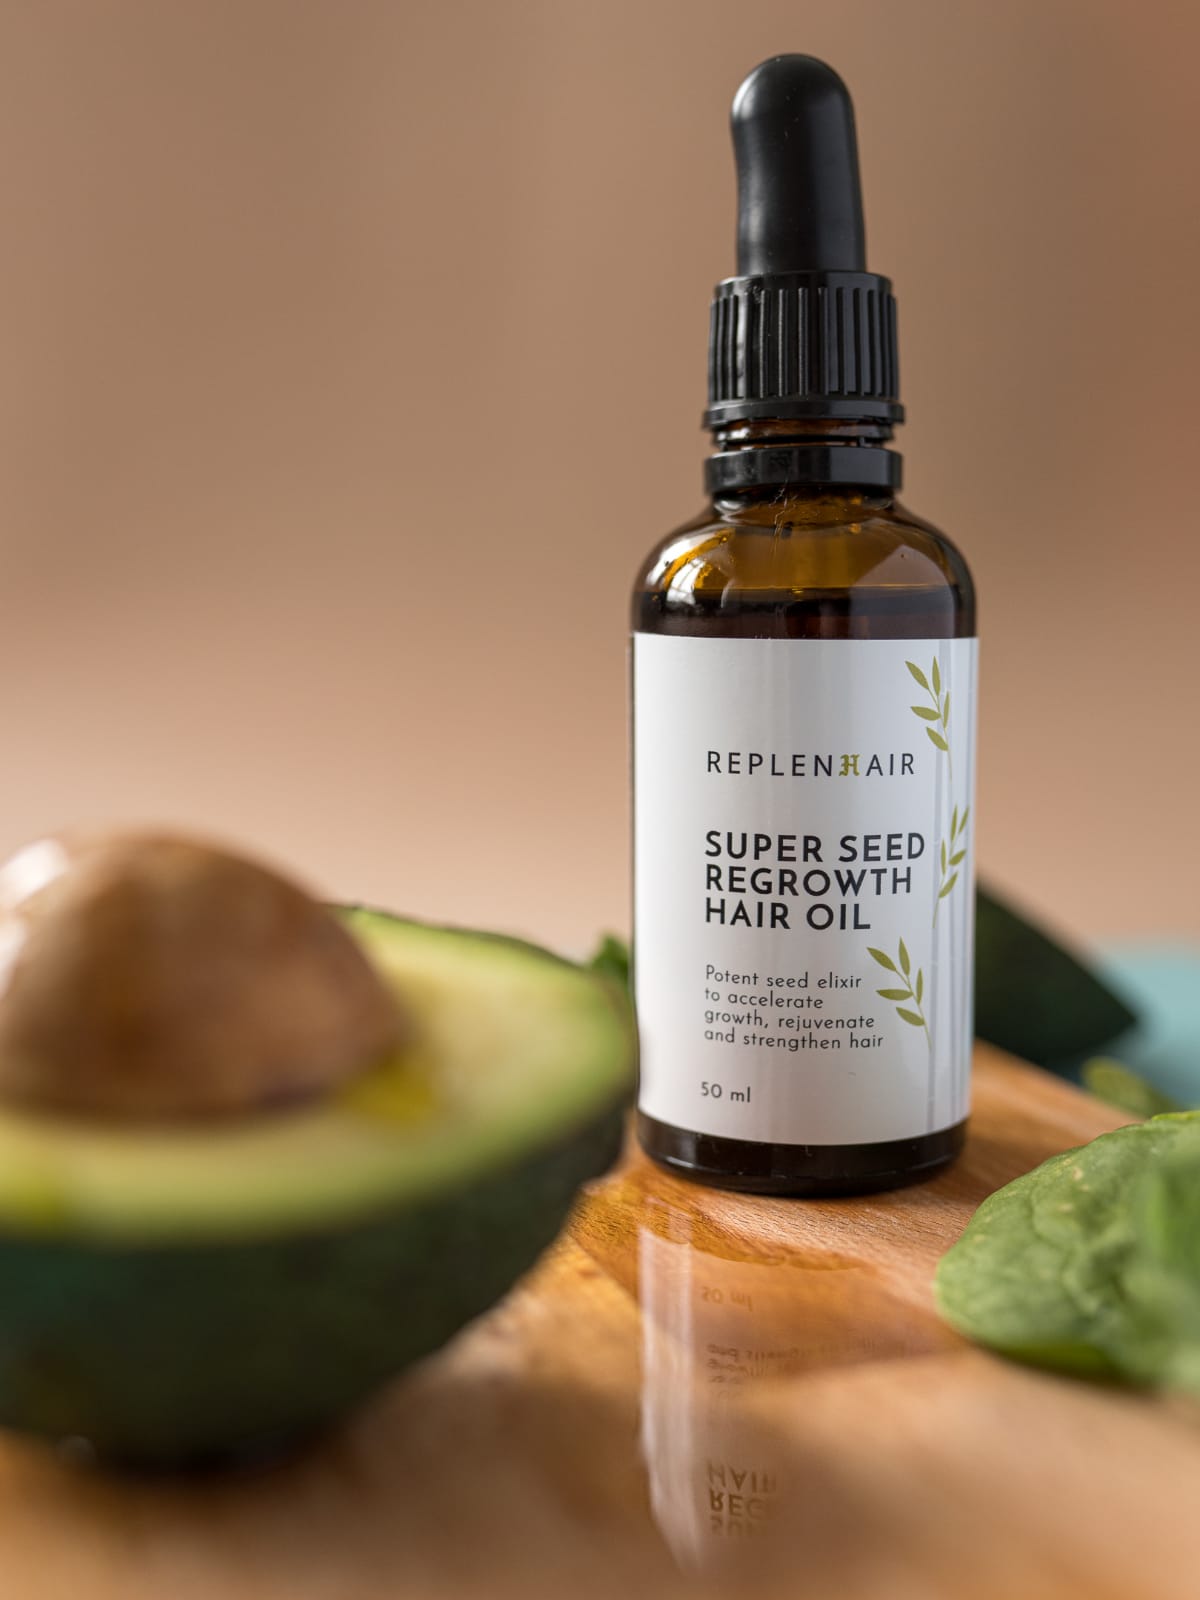 Product Shoot For Replenhair Super Seed Regrowth Hair Oil